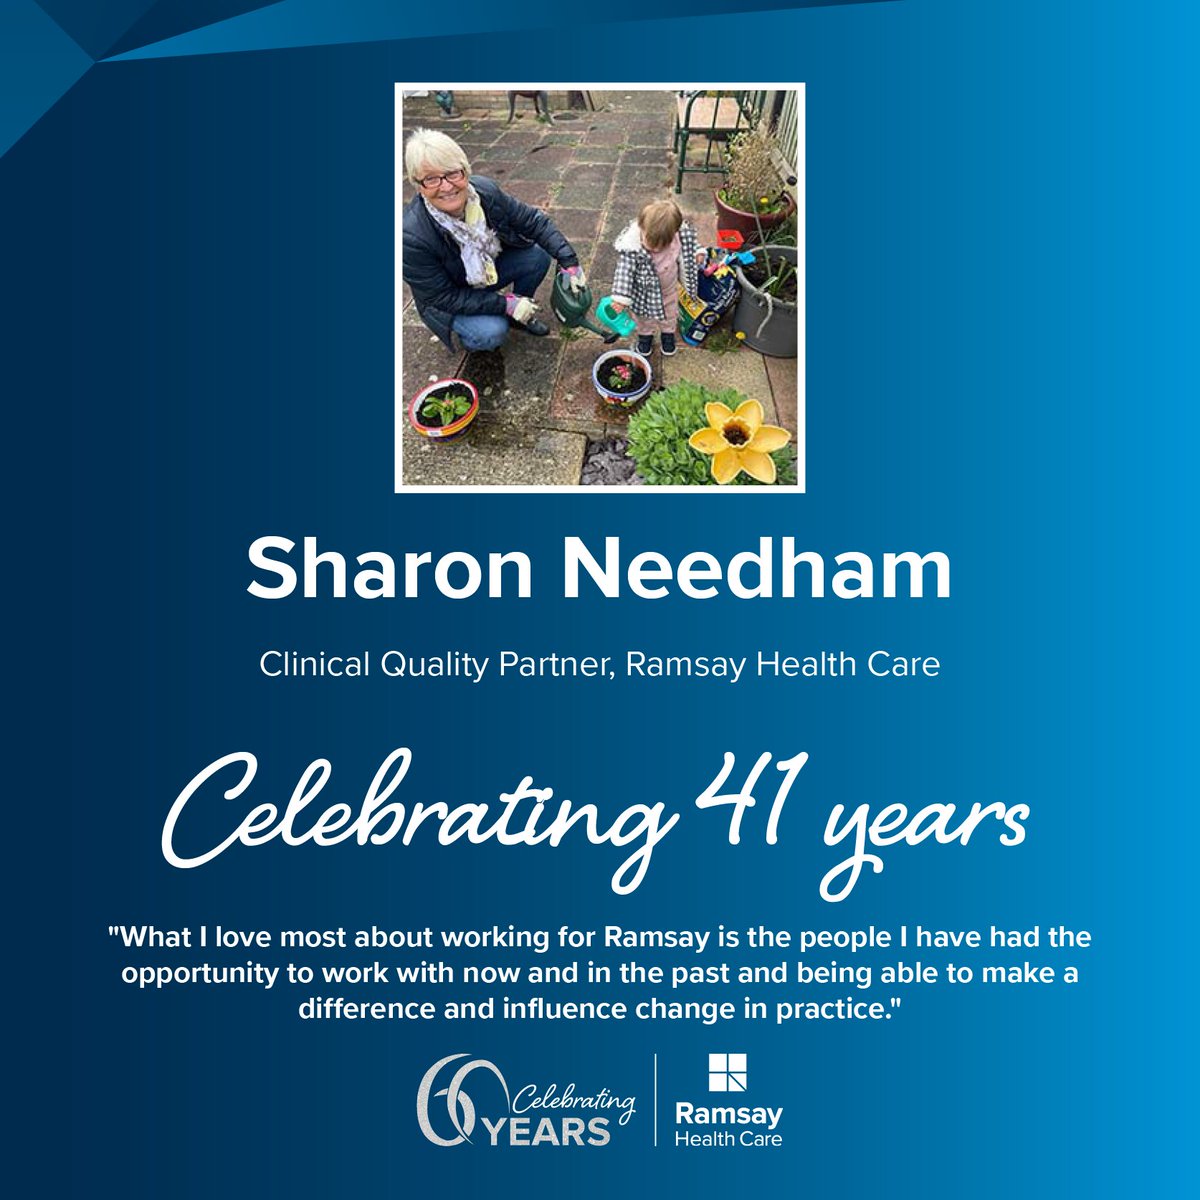 As Ramsay marks 60 years, we're excited to capture and share some of our amazing long standing staff members. We speak to Sharon Needham, Clinical Quality Partner as she celebrates 41 years with Ramsay Health Care UK. Read Sharon's full story here: ow.ly/ffak50Ro7O7